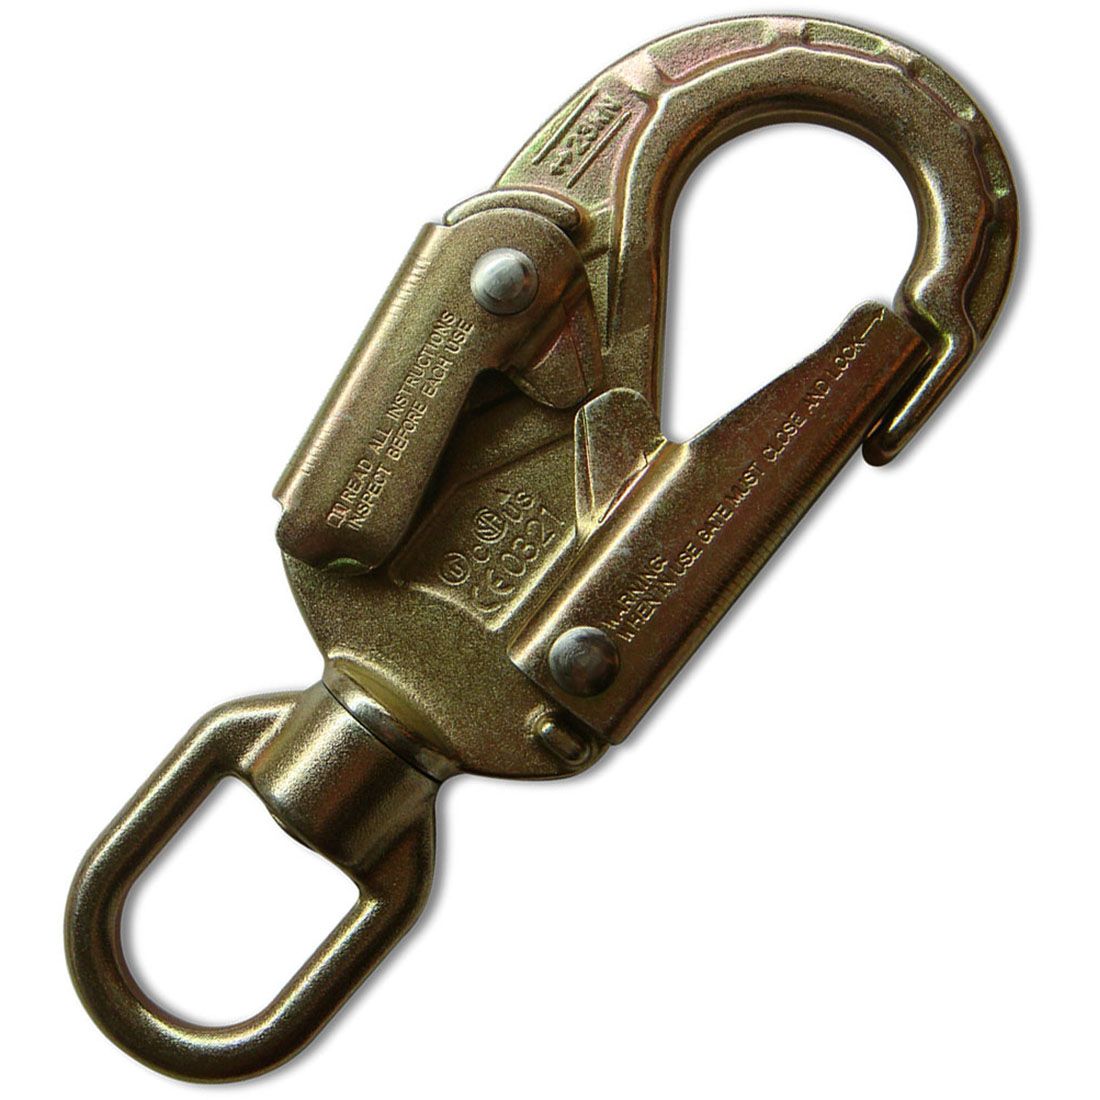 Safety Snap Hooks - Breaking Strengths Up To 9000 lbs.